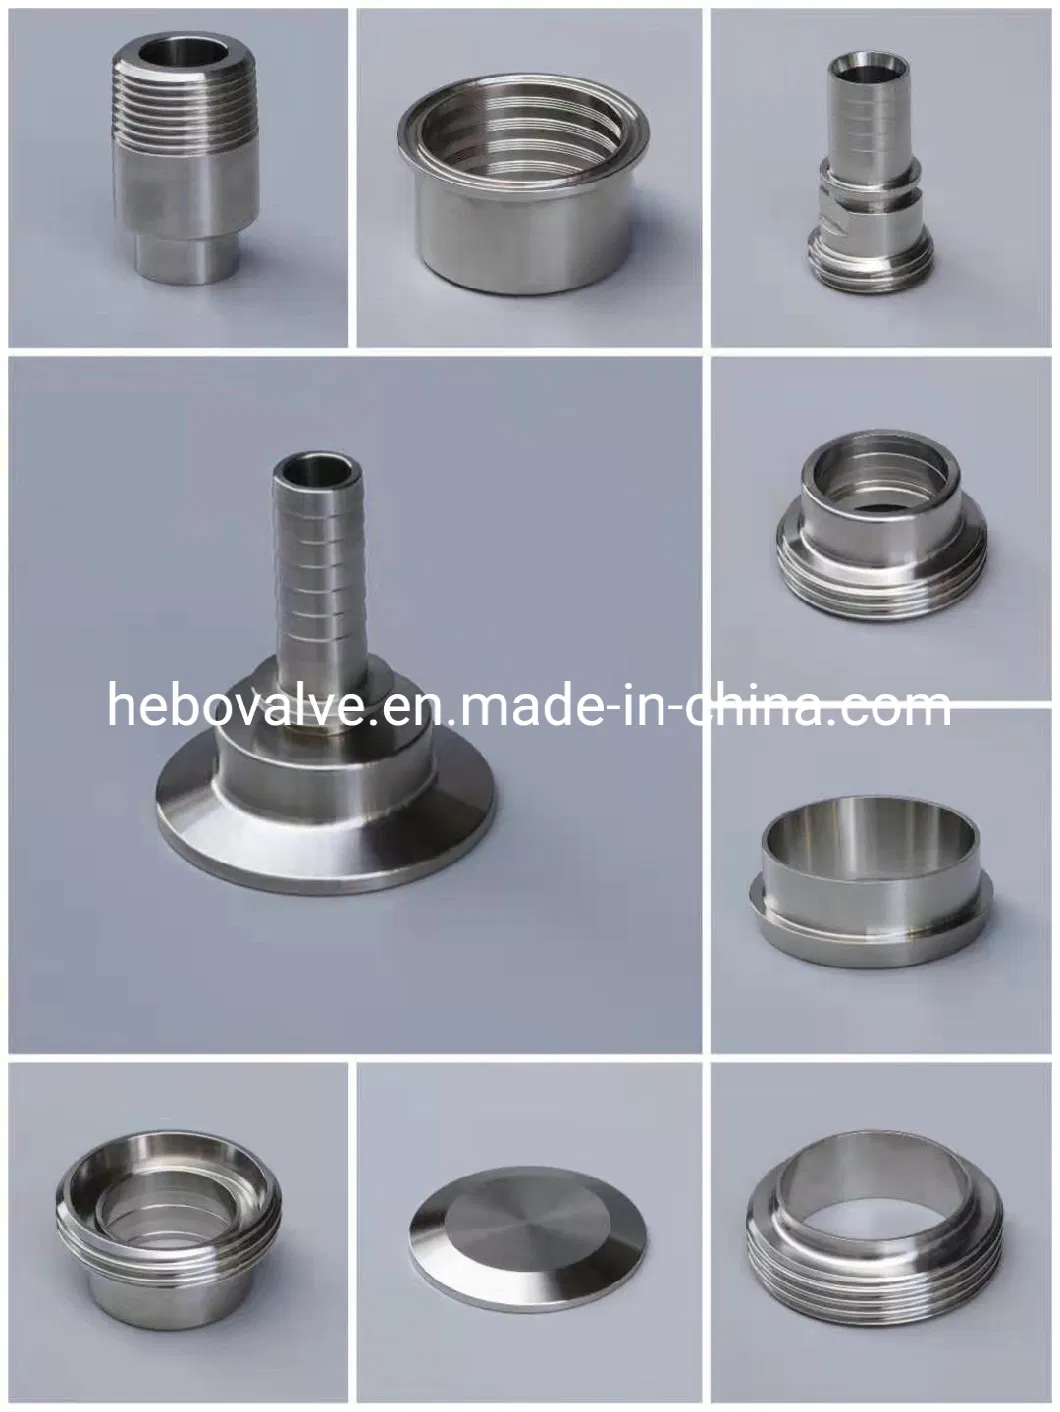 3A/SMS/DIN Sanitary Stainless Steel Pipe Fitting Hose Adapter